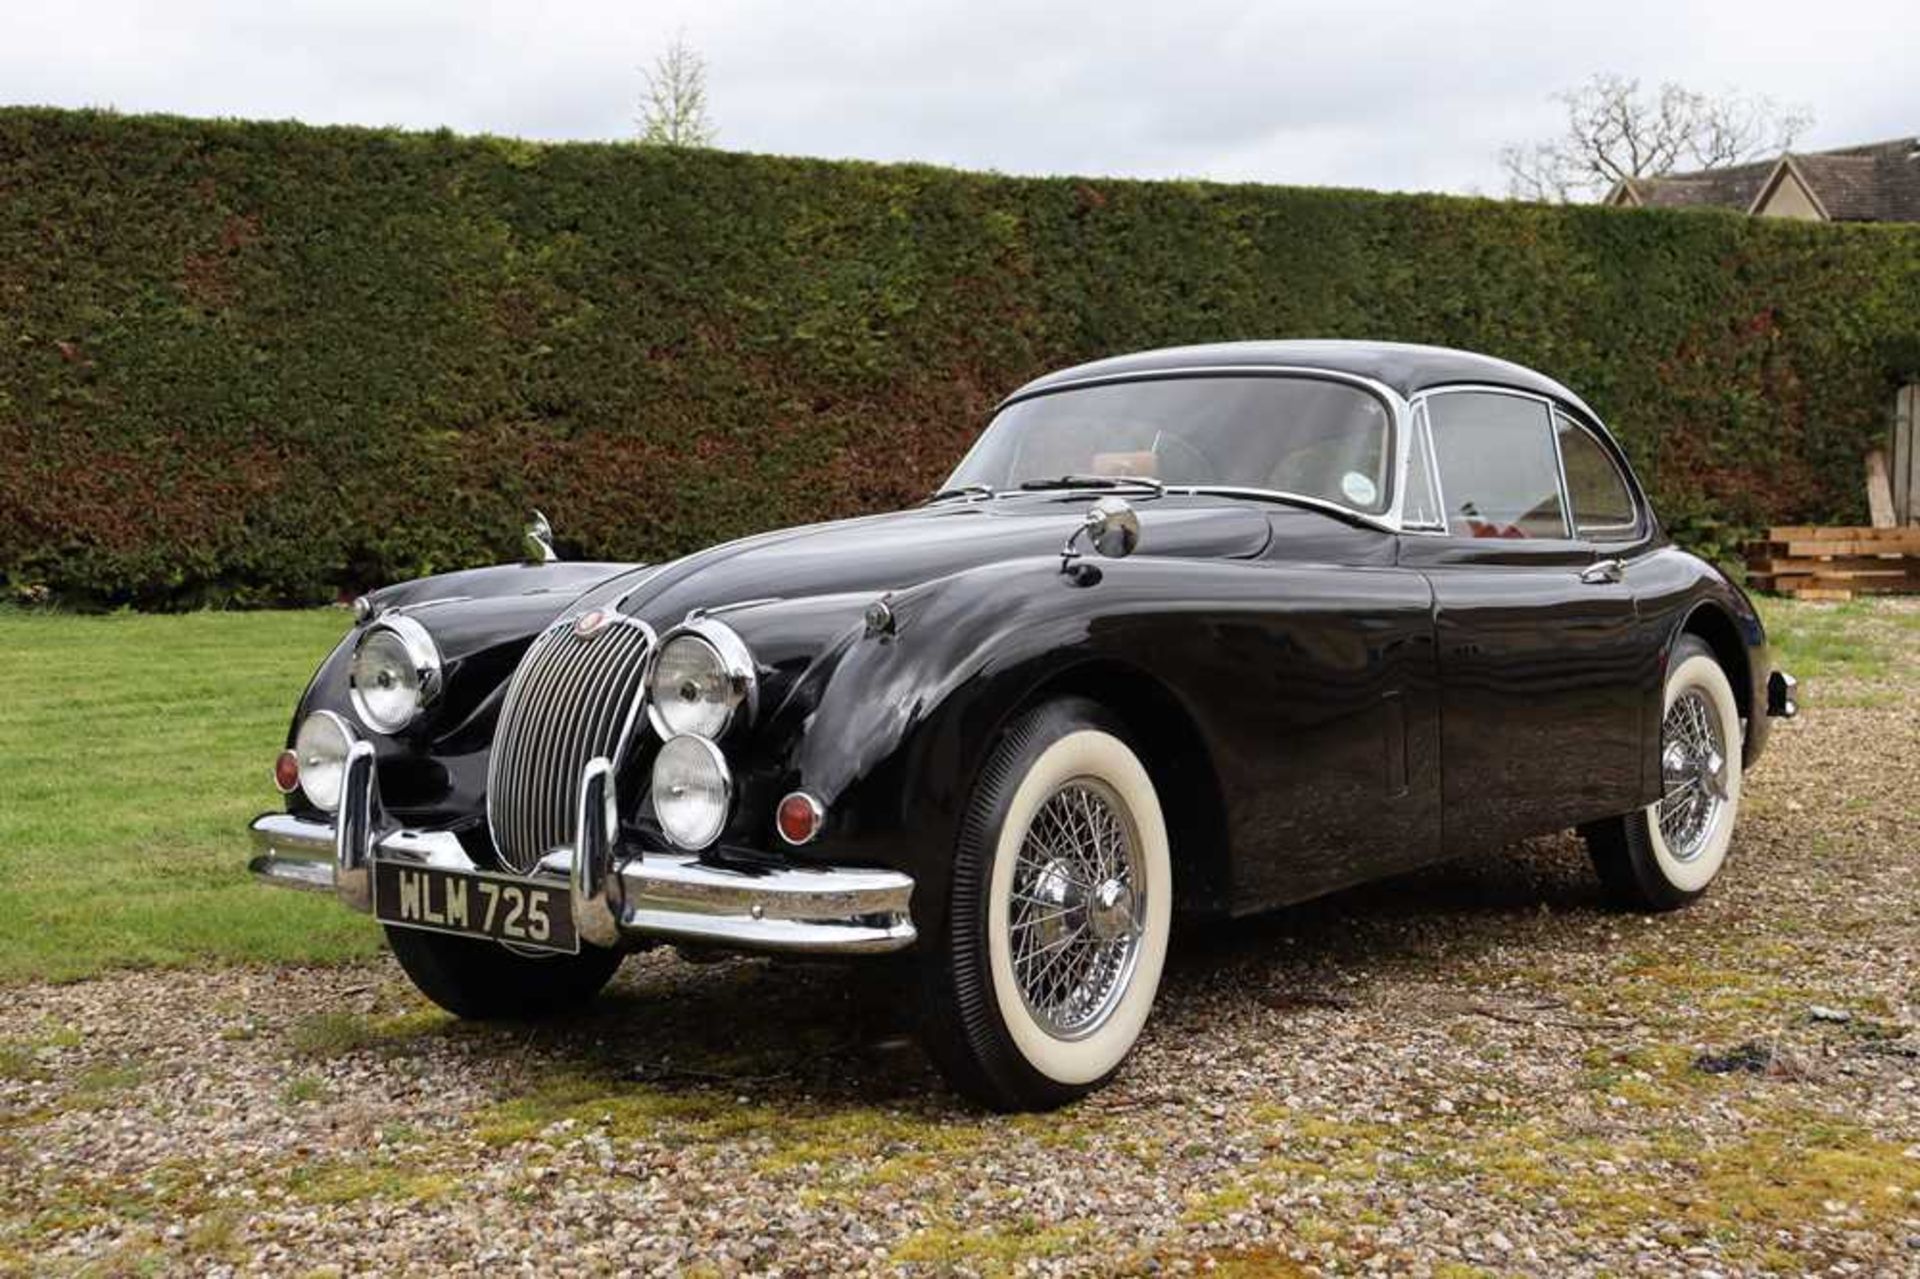 1959 Jaguar XK 150 Fixed Head Coupe 1 of just 1,368 RHD examples made - Image 7 of 49